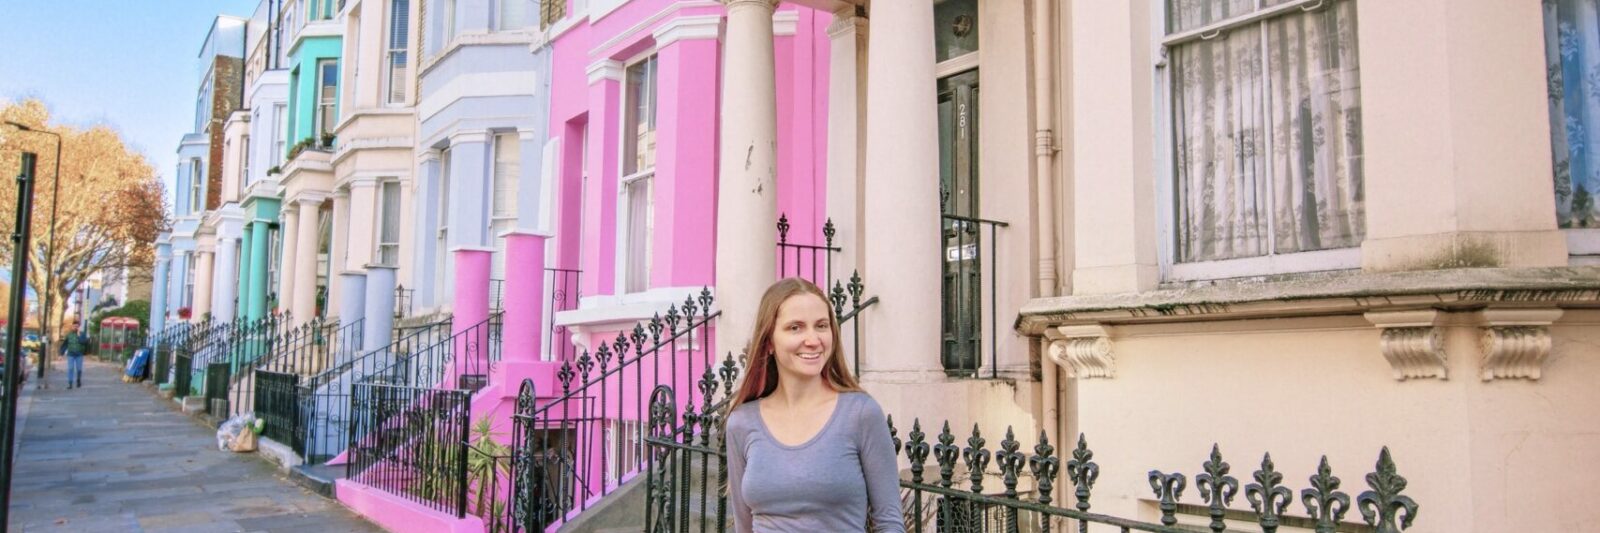 a girl in pink skirt standing in front of the colorful buildings in Notting Hill